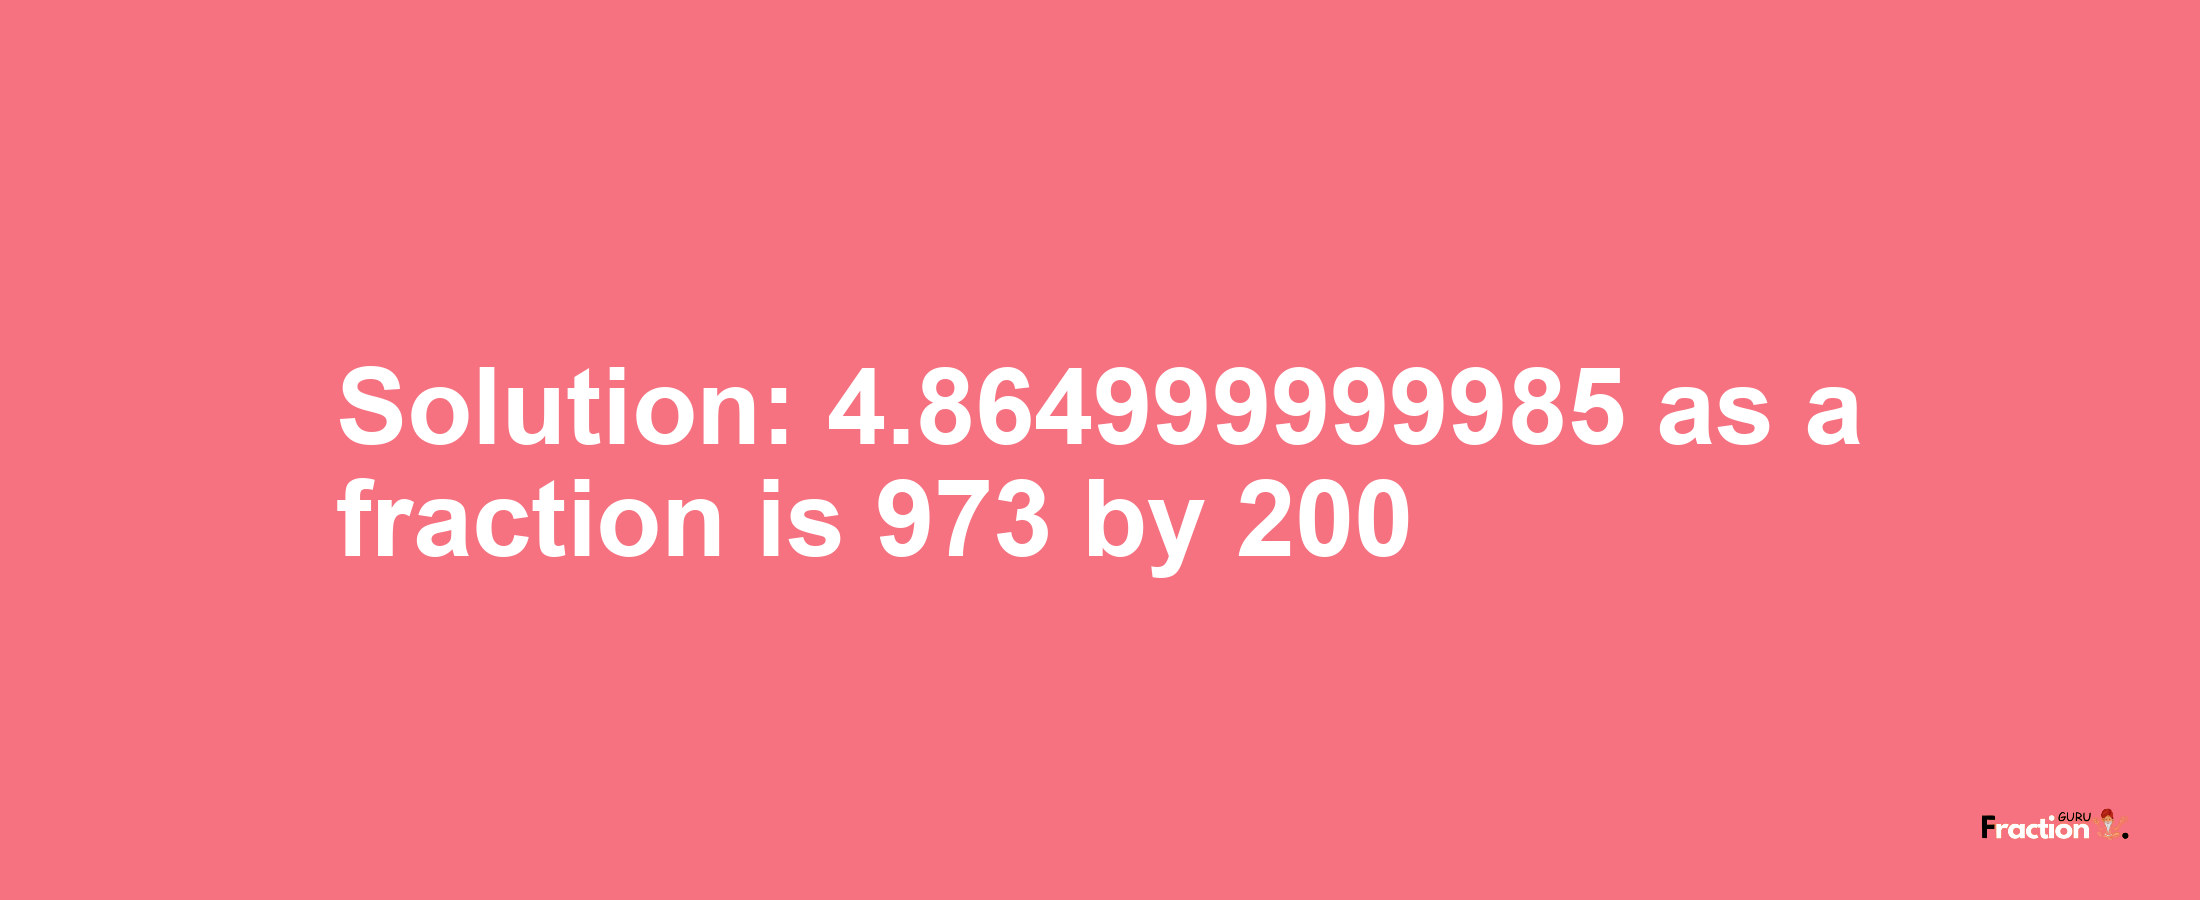 Solution:4.864999999985 as a fraction is 973/200